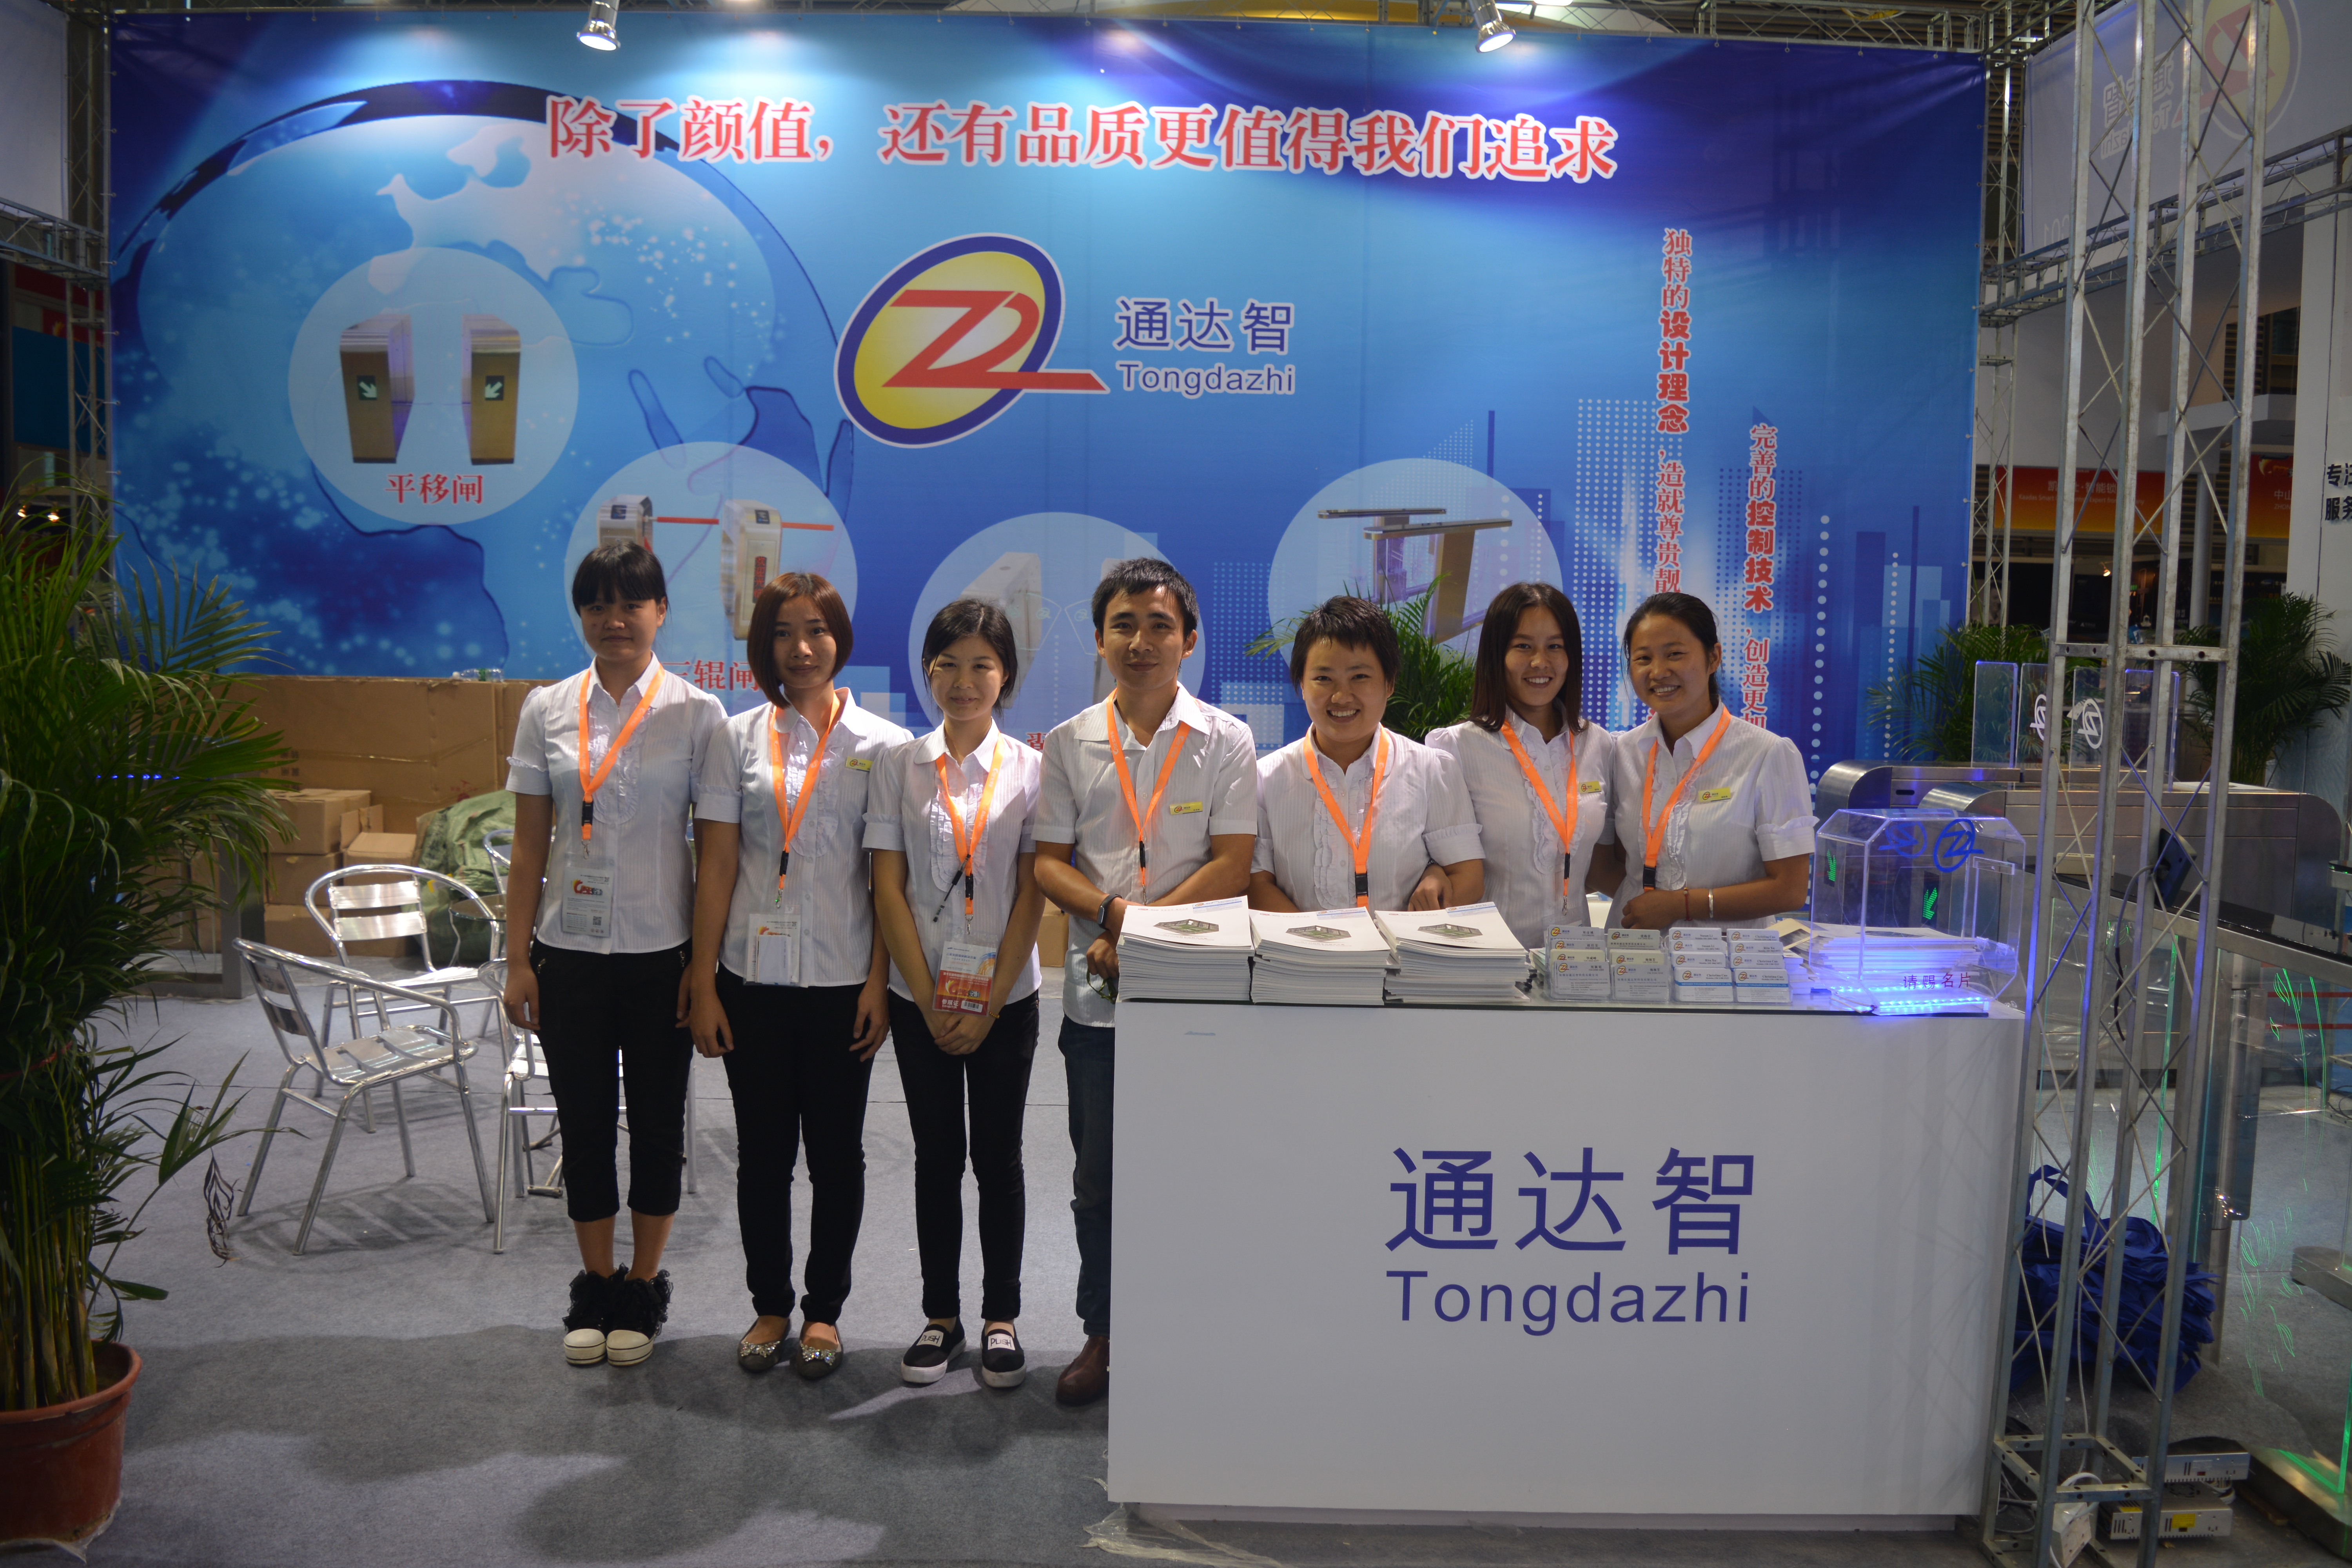 Exhibition in Tianjin